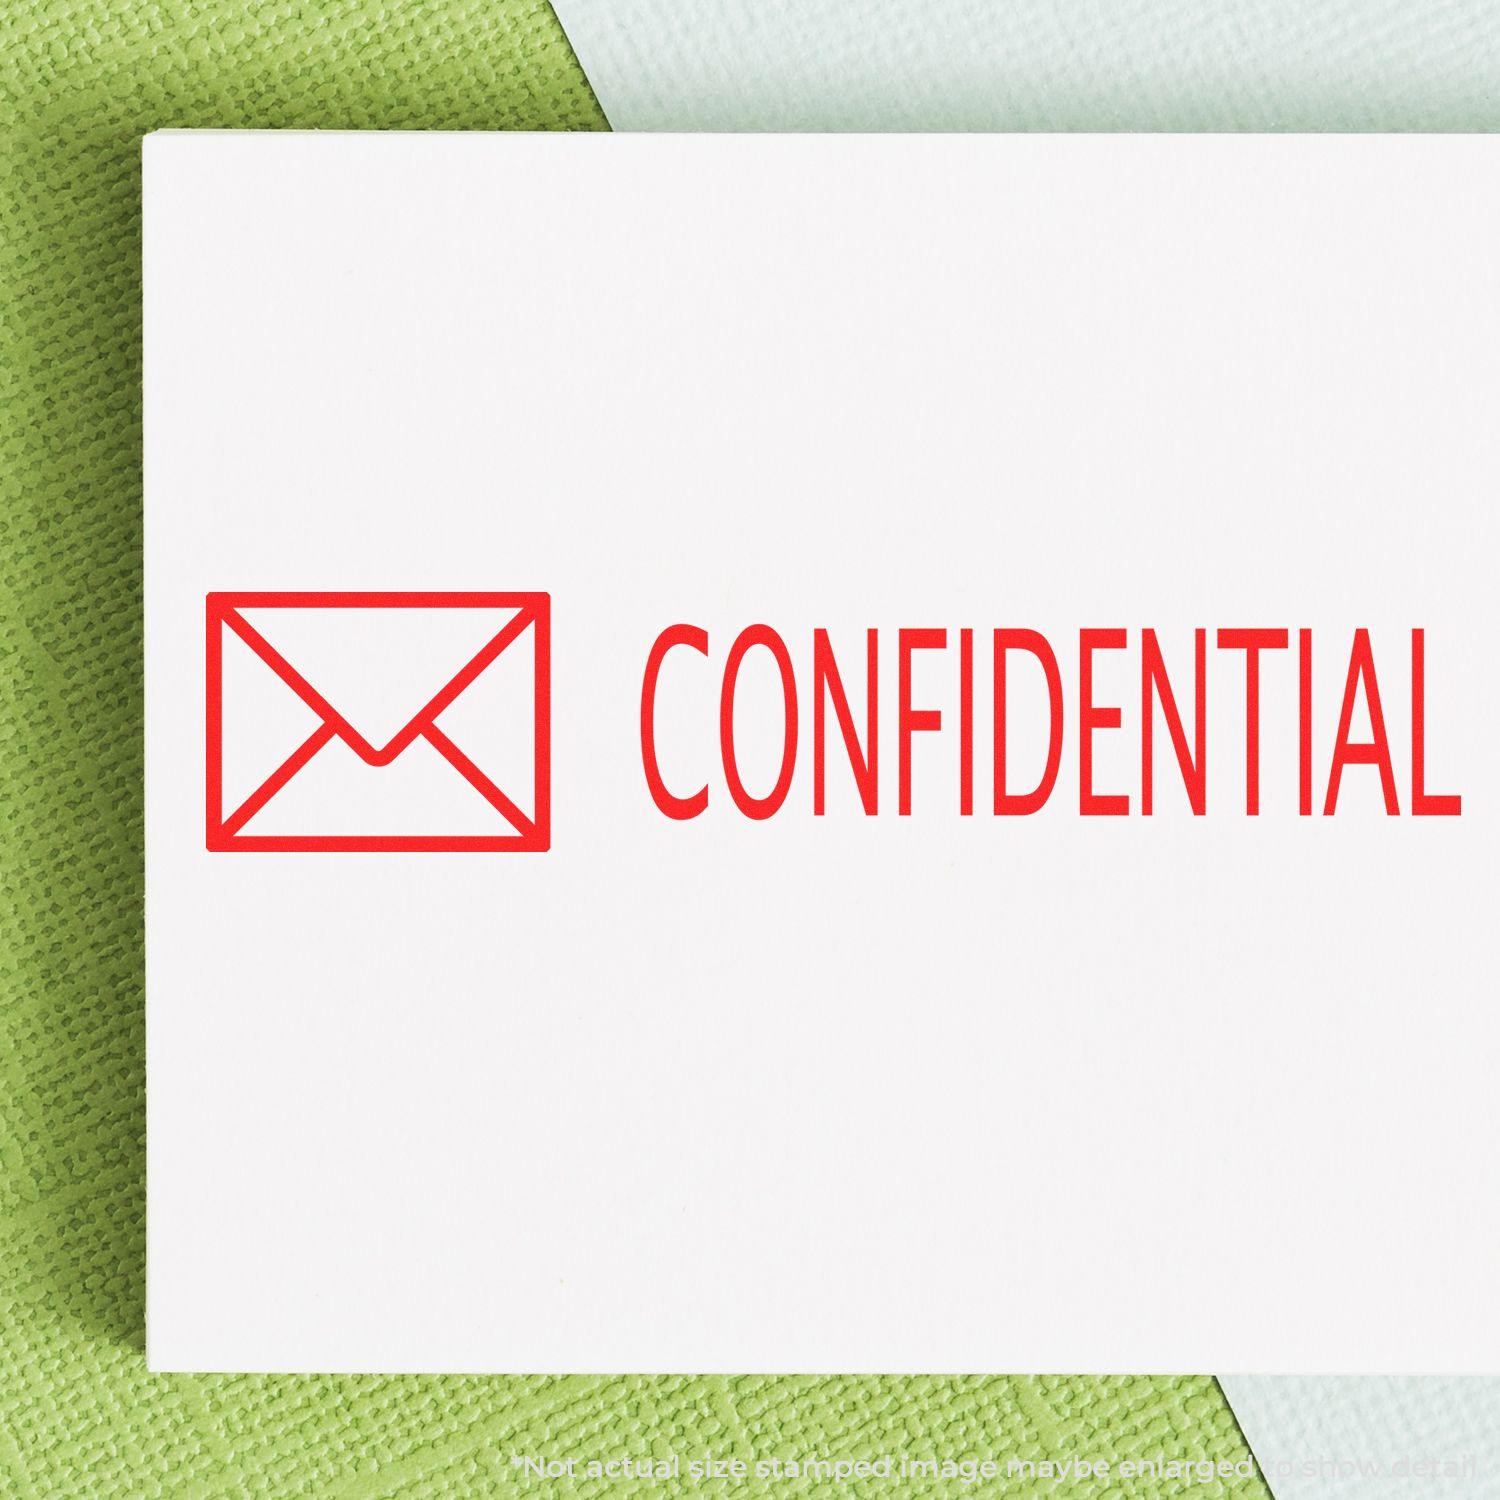 A self-inking stamp with a stamped image showing how the text "CONFIDENTIAL" in a large font with an image of an envelope on the left side is displayed after stamping.